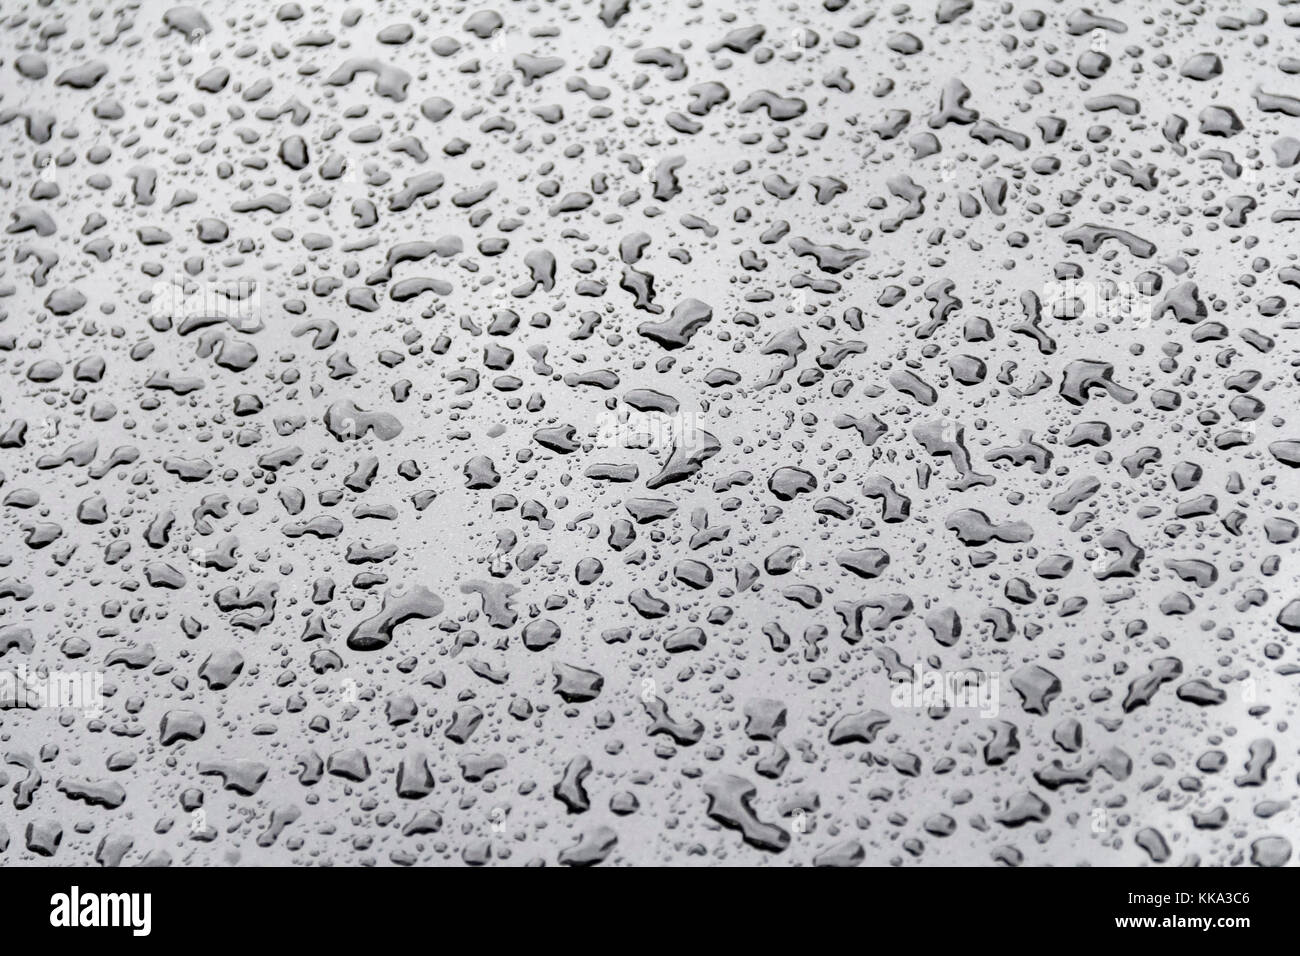 abstract natural background showing a closeup of water beads on glossy repellent ground Stock Photo